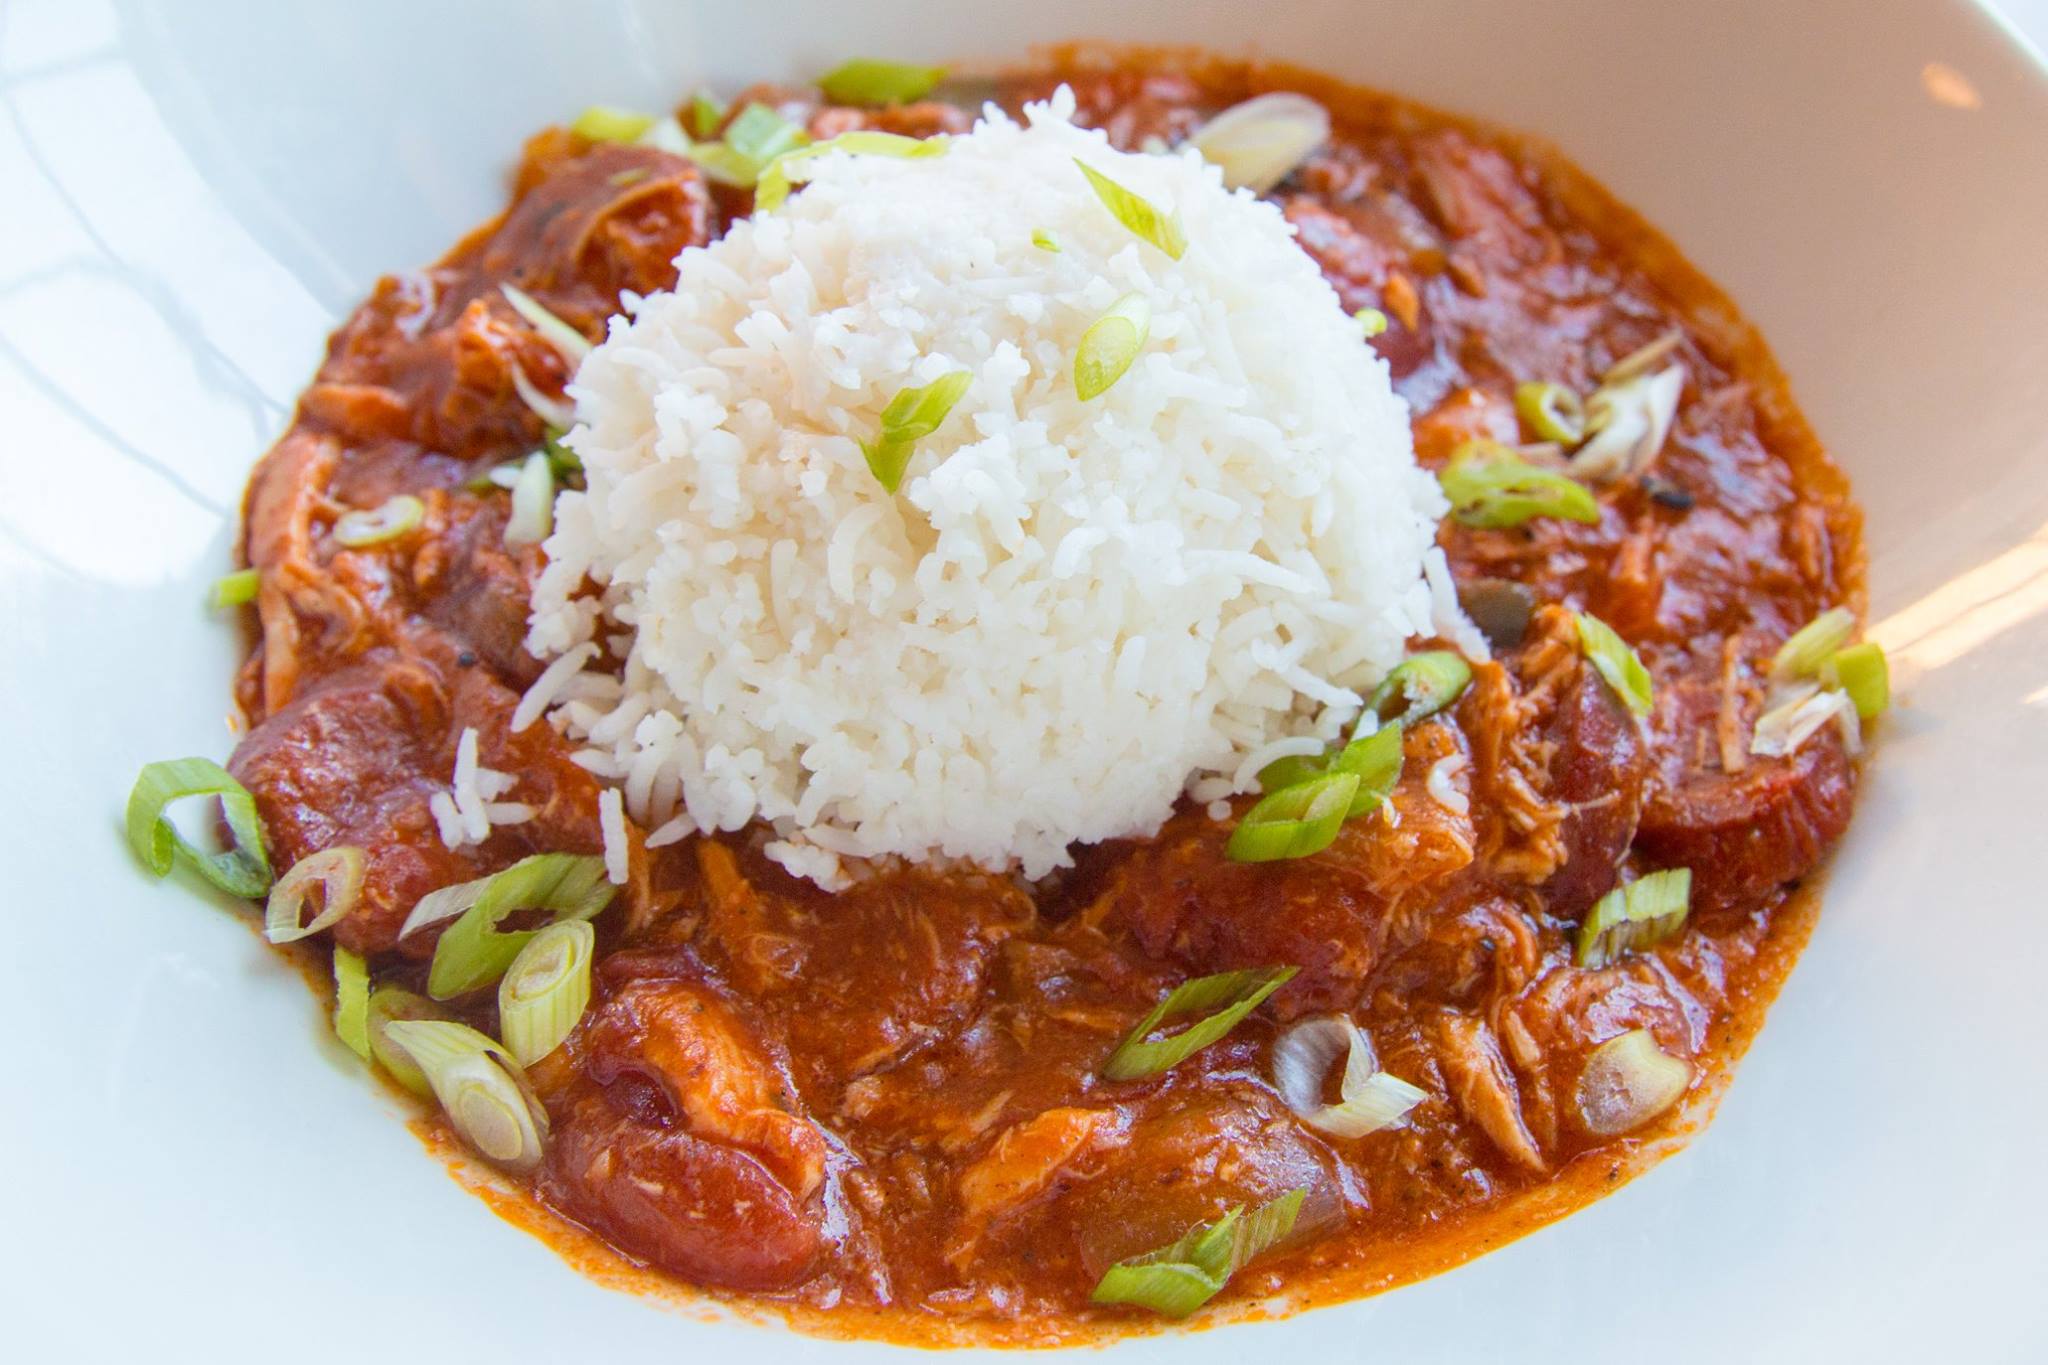 A plate of jambalaya topped with a mound of white rice, garnished with sliced green onions. The jambalaya has a rich red sauce with visible slices of Andouille sausage and hints of shredded chicken, indicative of a traditional, spicy Cajun dish.